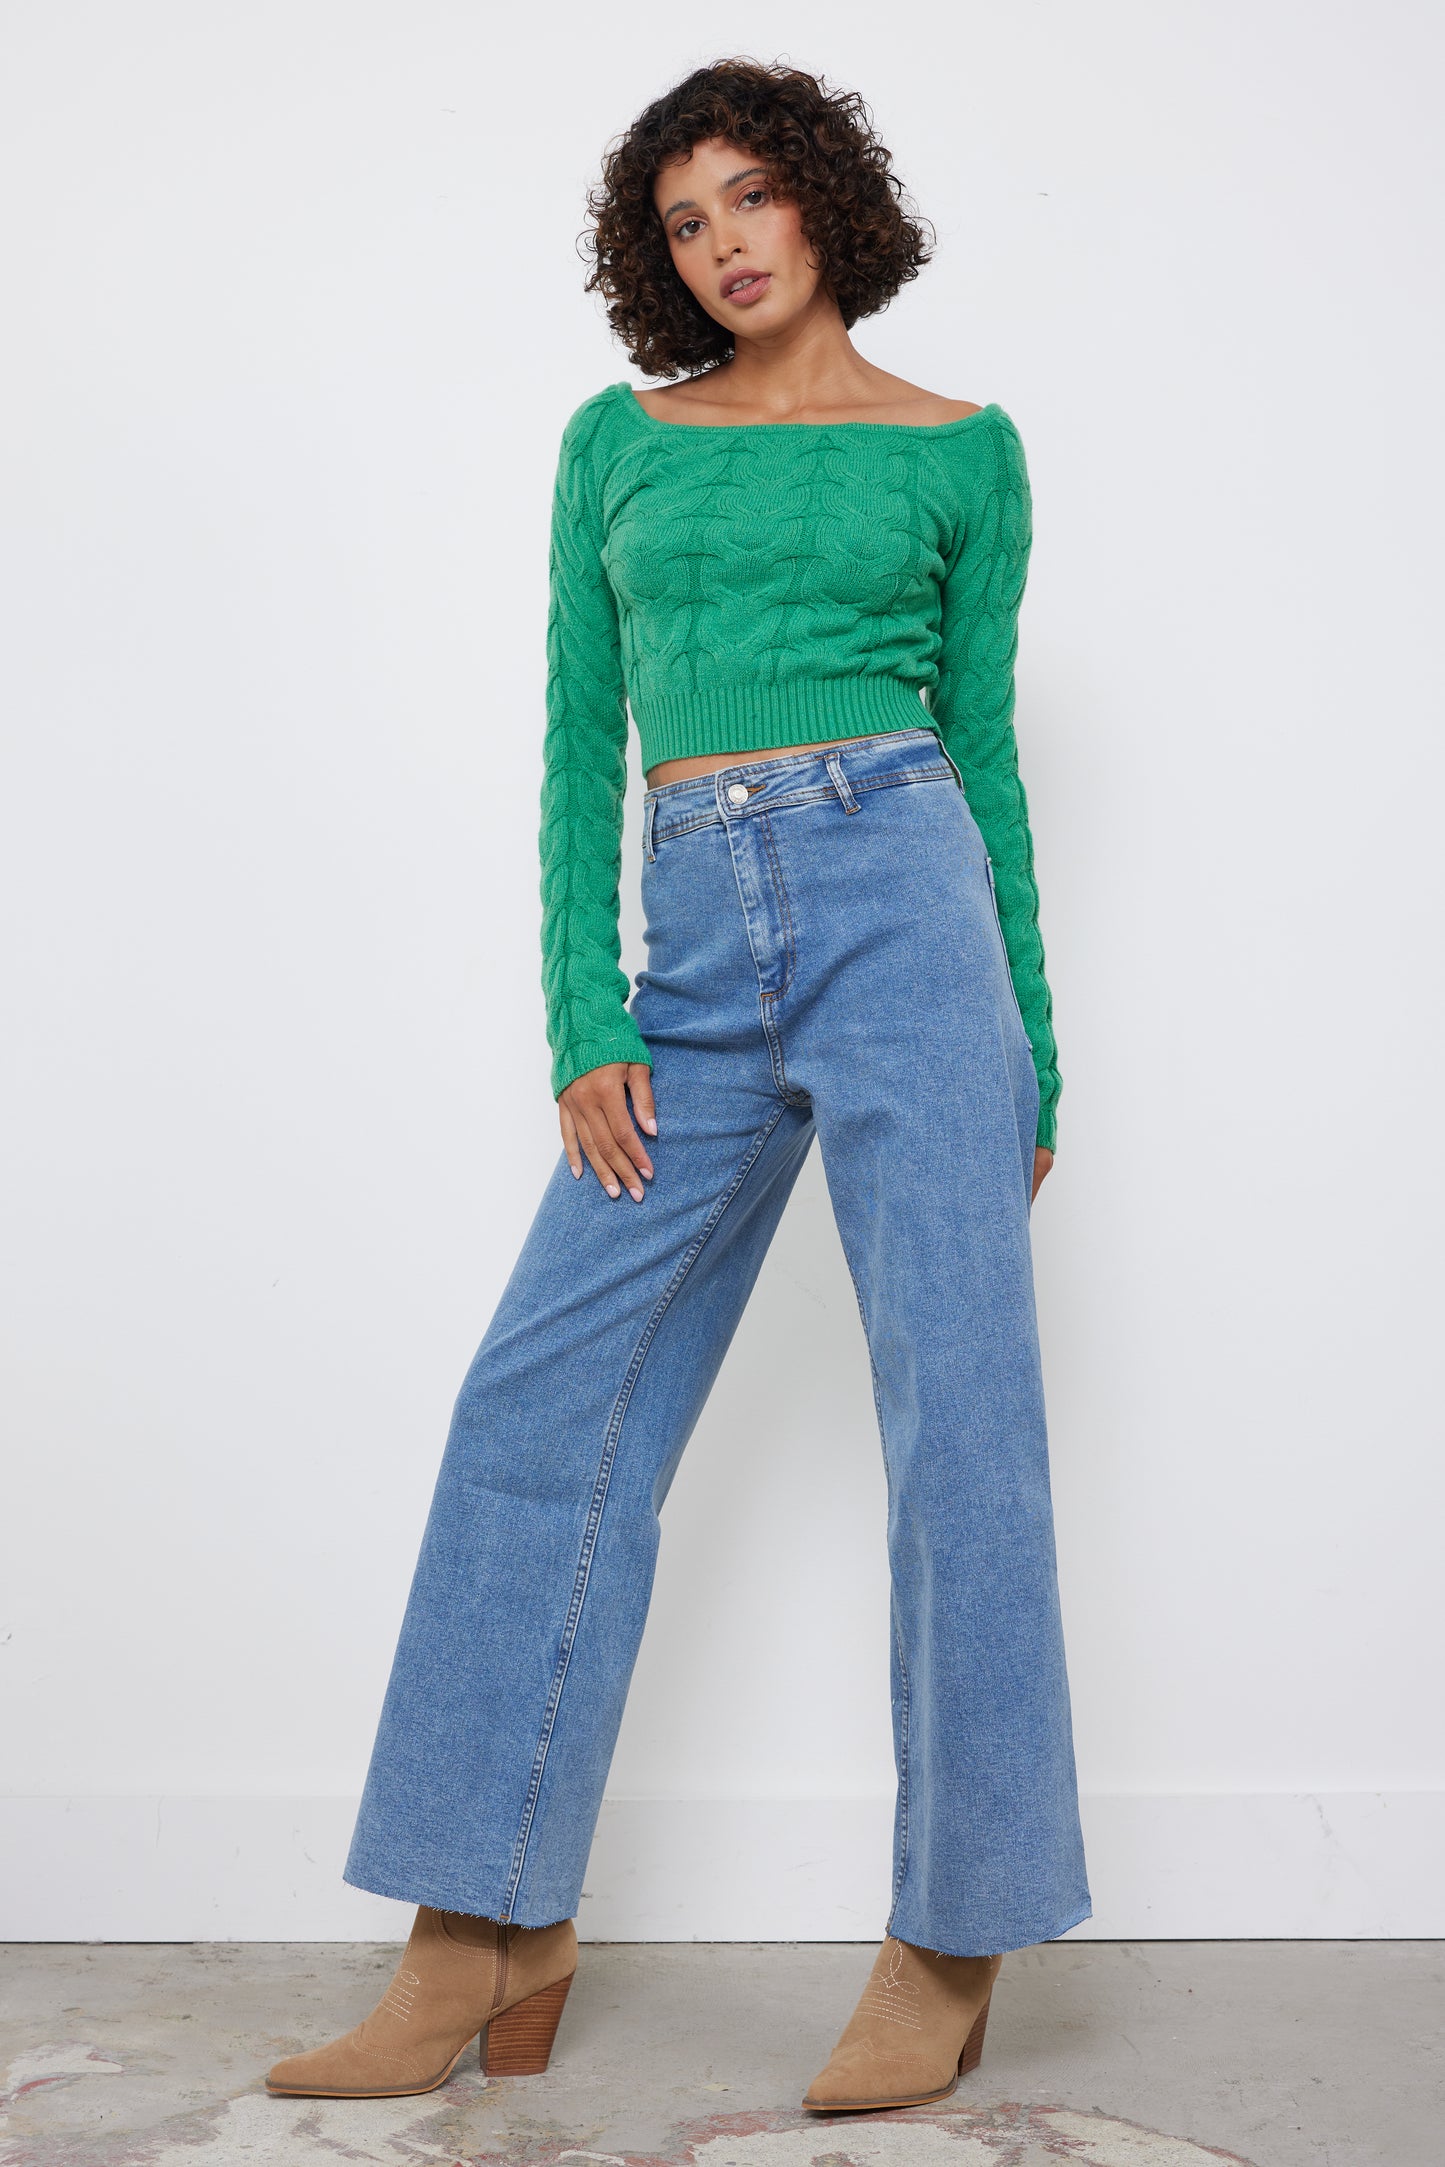 All Things Sweet Kelly Green Top